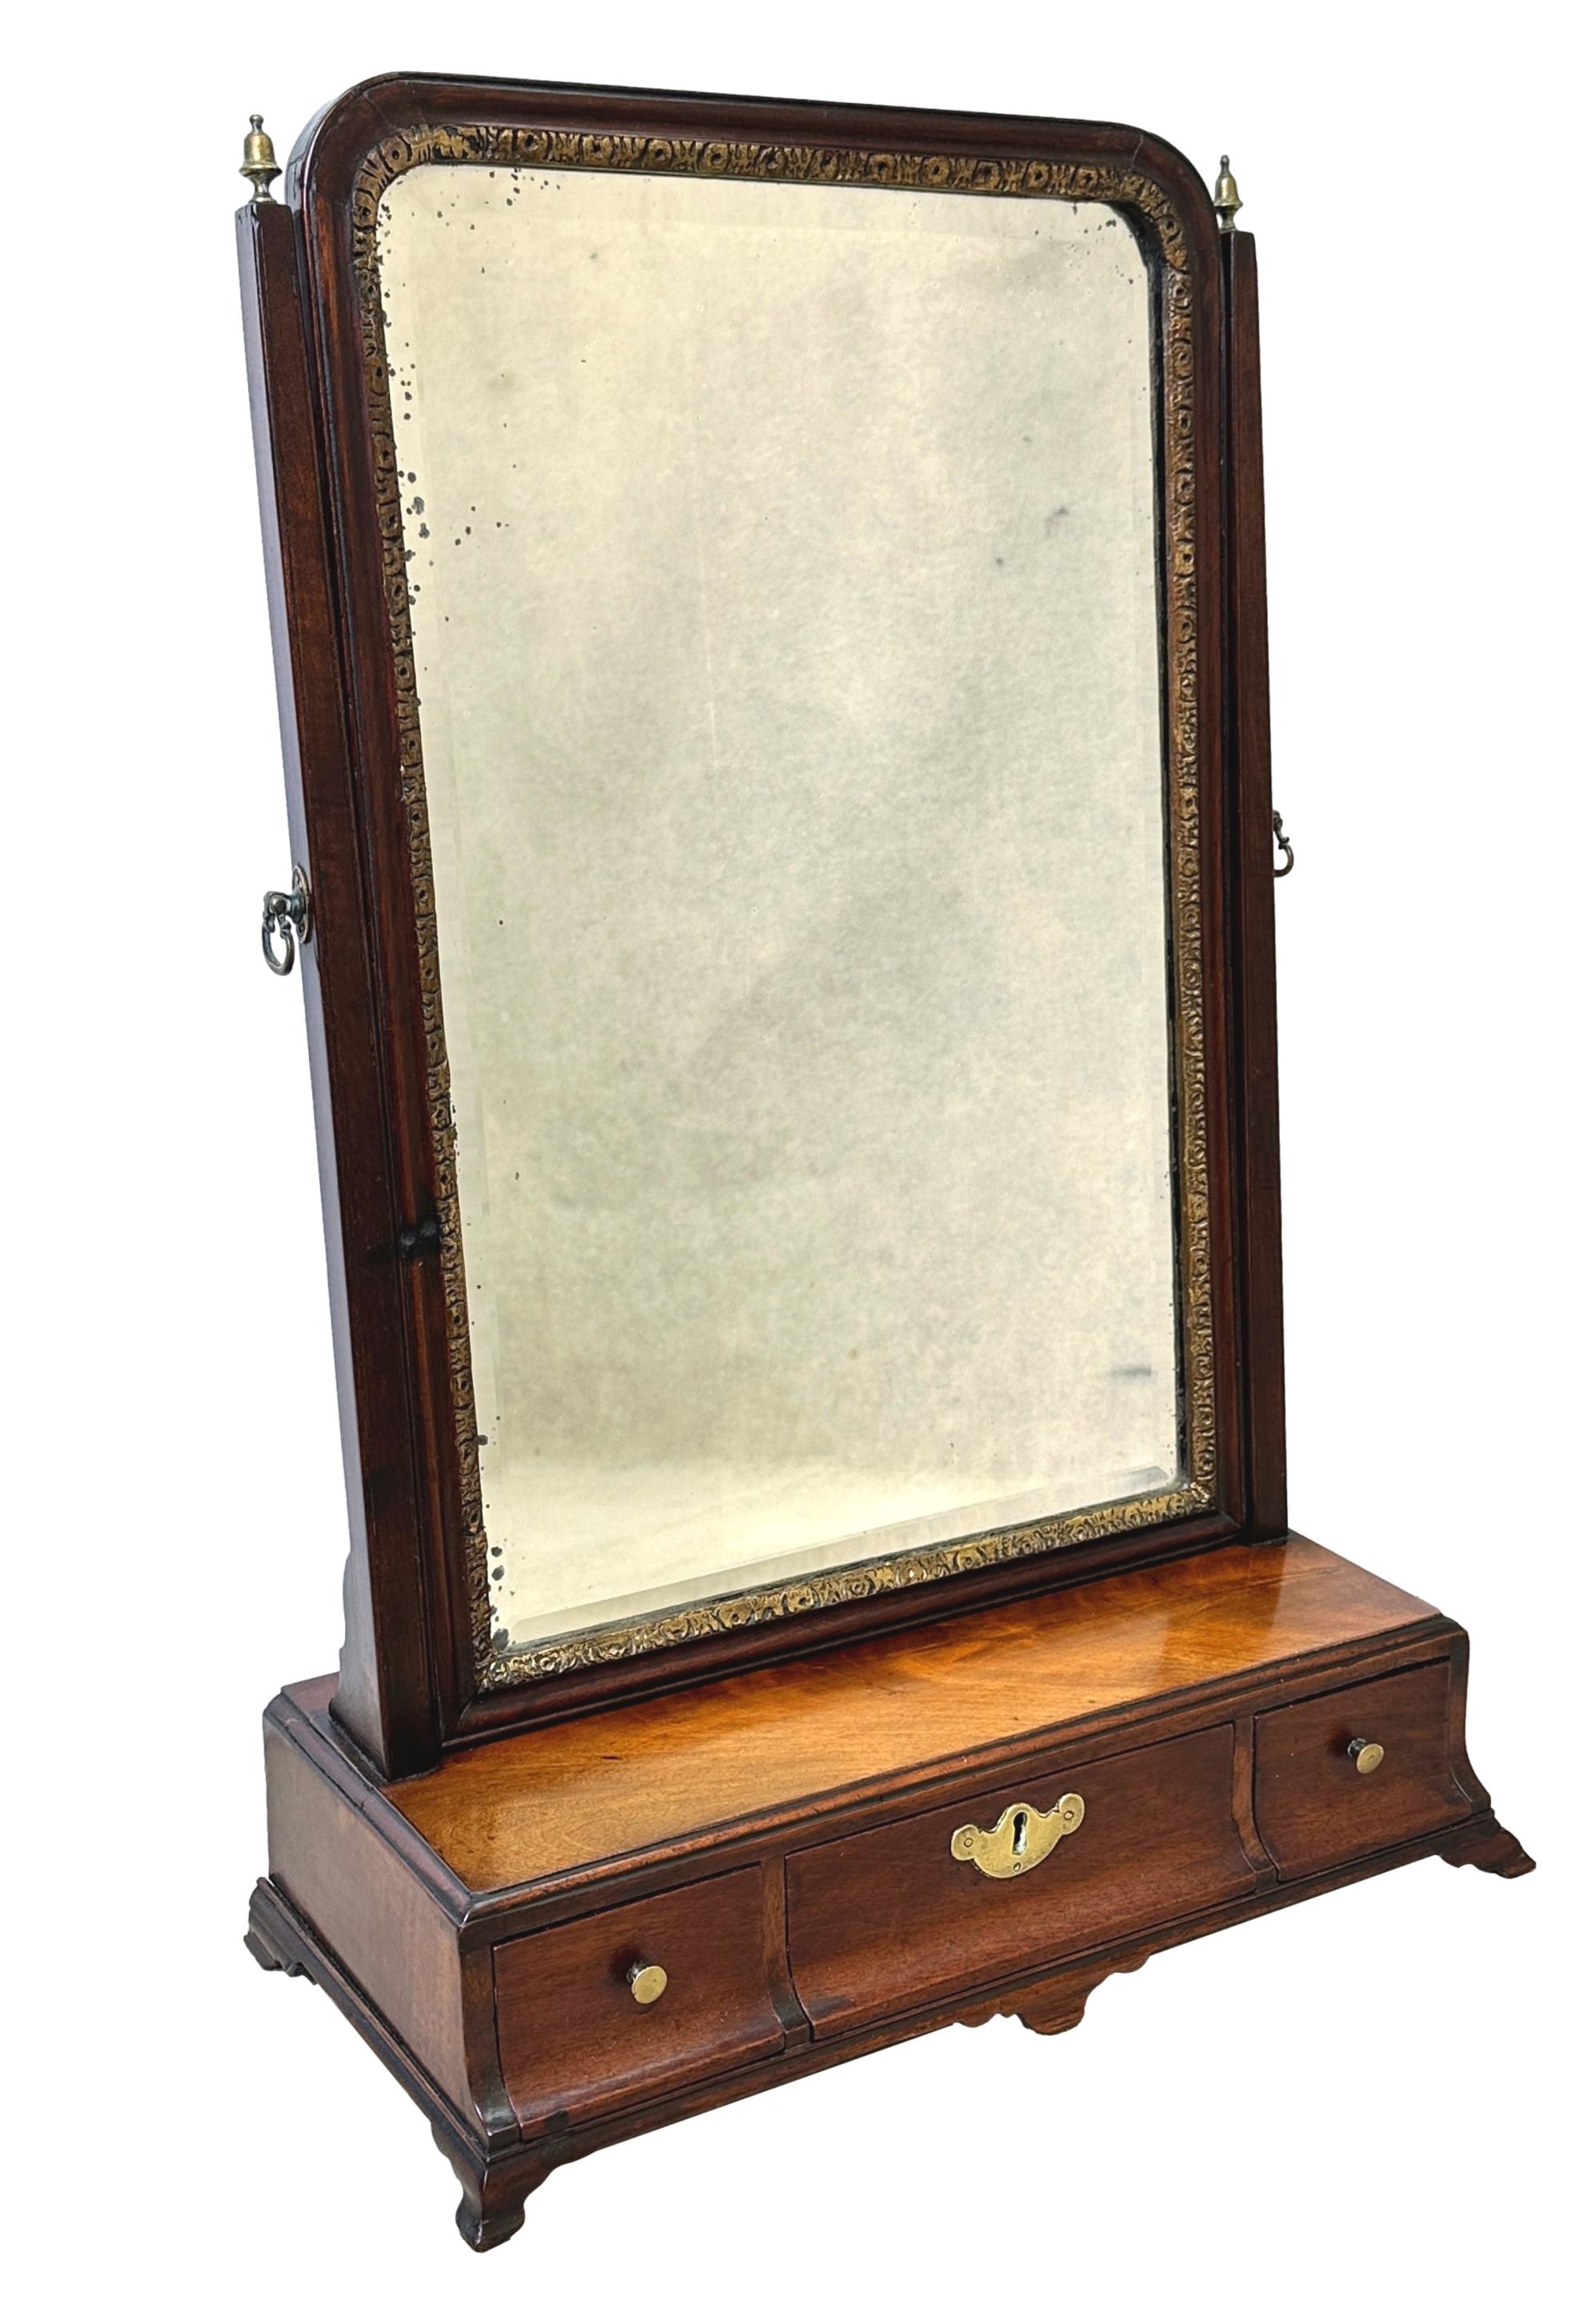 A very good quality, 18th century, George II period mahogany dressing table mirror, having old rectangular plate set within gilded slip to elegant moulded frame, over well figured base with three frieze drawers, raised on elegant replacement shaped